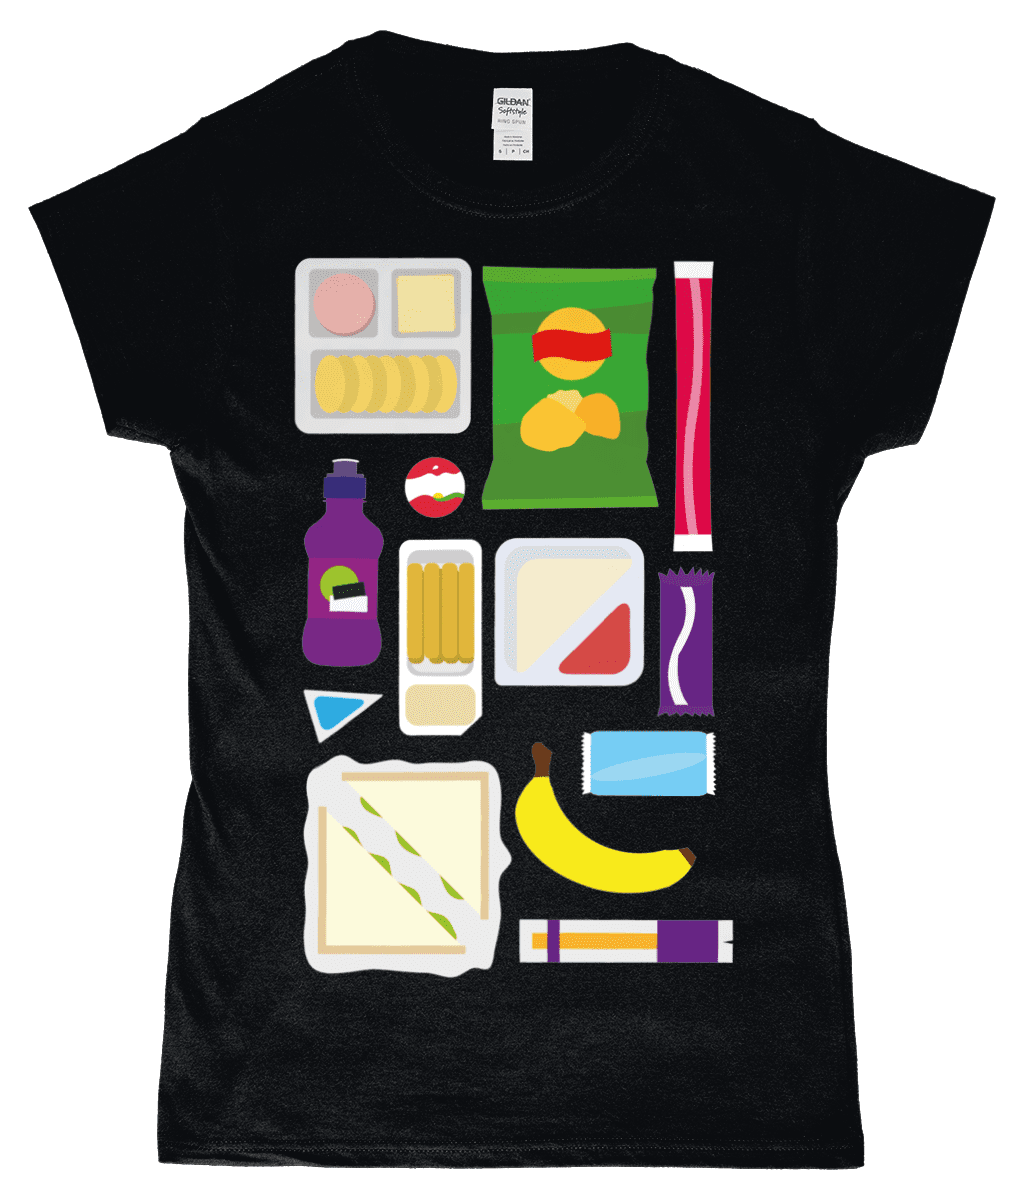 Primary School Packed Lunch Box Women's T-Shirt Black